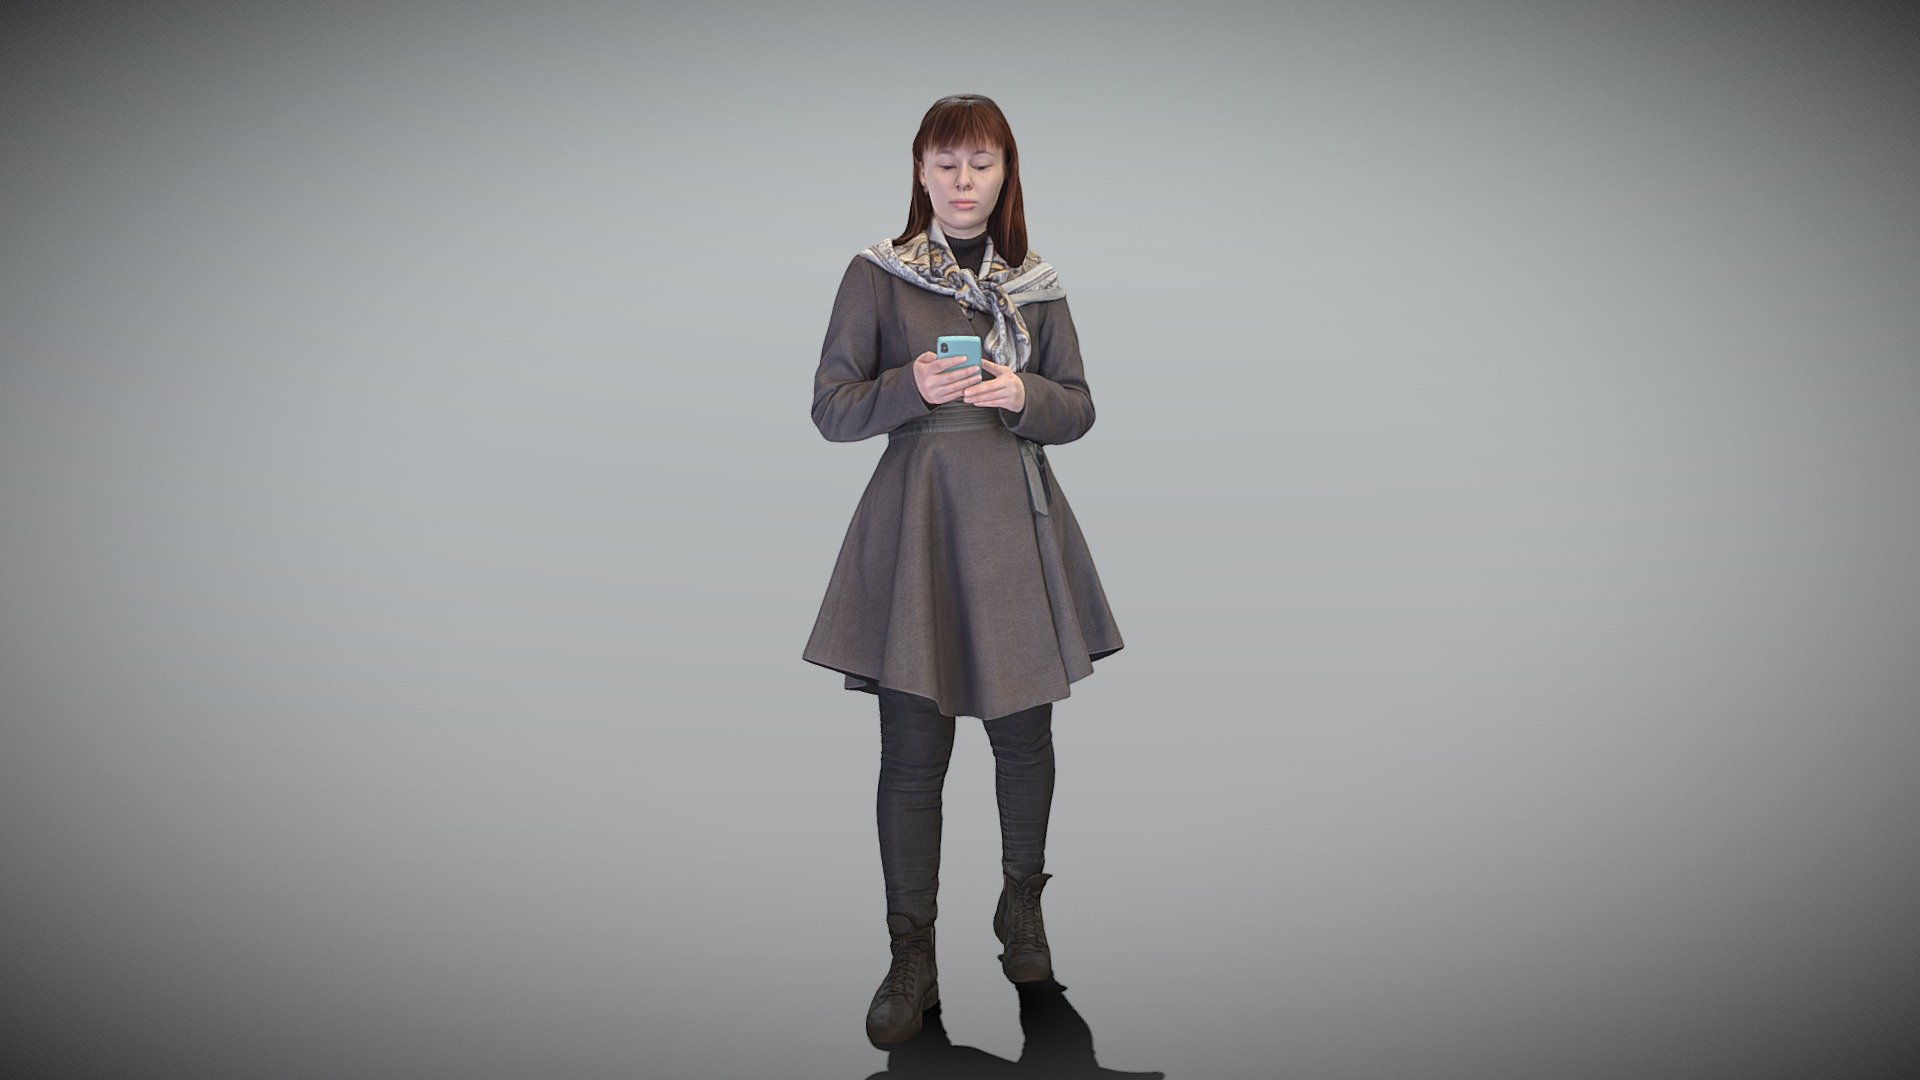 This is a true human size and detailed model of a beautiful young woman of Caucasian appearance dressed in street style. The model is captured in casual pose to be perfectly matching for various architectural, product visualization as a background character within urban installations, city designs, outdoor design presentations, VR/AR content, etc.

Technical specifications:




digital double 3d scan model

150k &amp; 30k triangles | double triangulated

high-poly model (.ztl tool with 5 subdivisions) clean and retopologized automatically via ZRemesher

sufficiently clean

PBR textures 8K resolution: Diffuse, Normal, Specular maps

non-overlapping UV map

no extra plugins are required for this model

Download package includes a Cinema 4D project file with Redshift shader, OBJ, FBX, STL files, which are applicable for 3ds Max, Maya, Unreal Engine, Unity, Blender, etc. All the textures you will find in the “Tex” folder, included into the main archive.

3D EVERYTHING

Stand with Ukraine! - Woman in coat using smartphone 428 - Buy Royalty Free 3D model by deep3dstudio 3d model